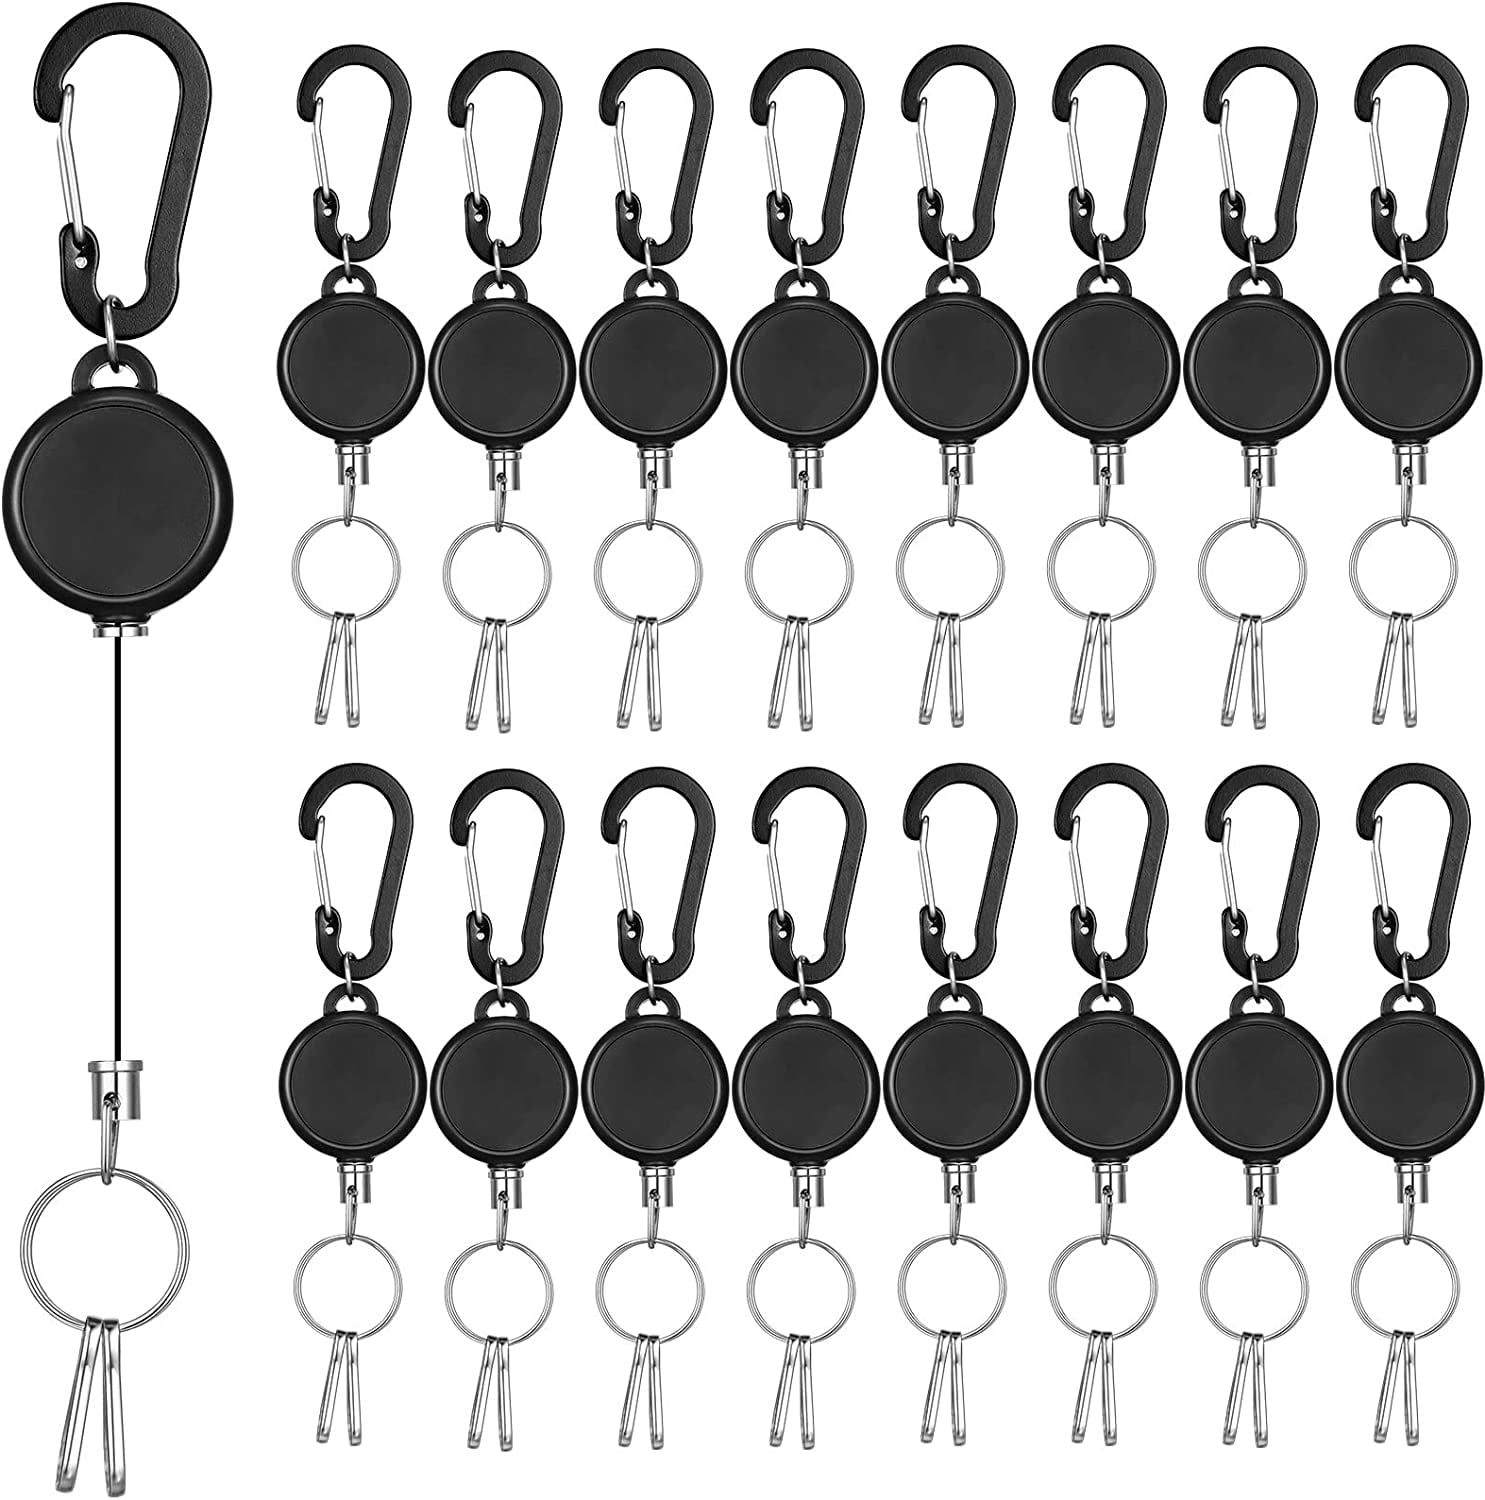 Zoizocp 12 Pieces Mixed Colors Carabiner Retractable Badge Reel Clips Lanyard Extender for Key Ring and ID Cards 6 Colors, Women's, Size: One size